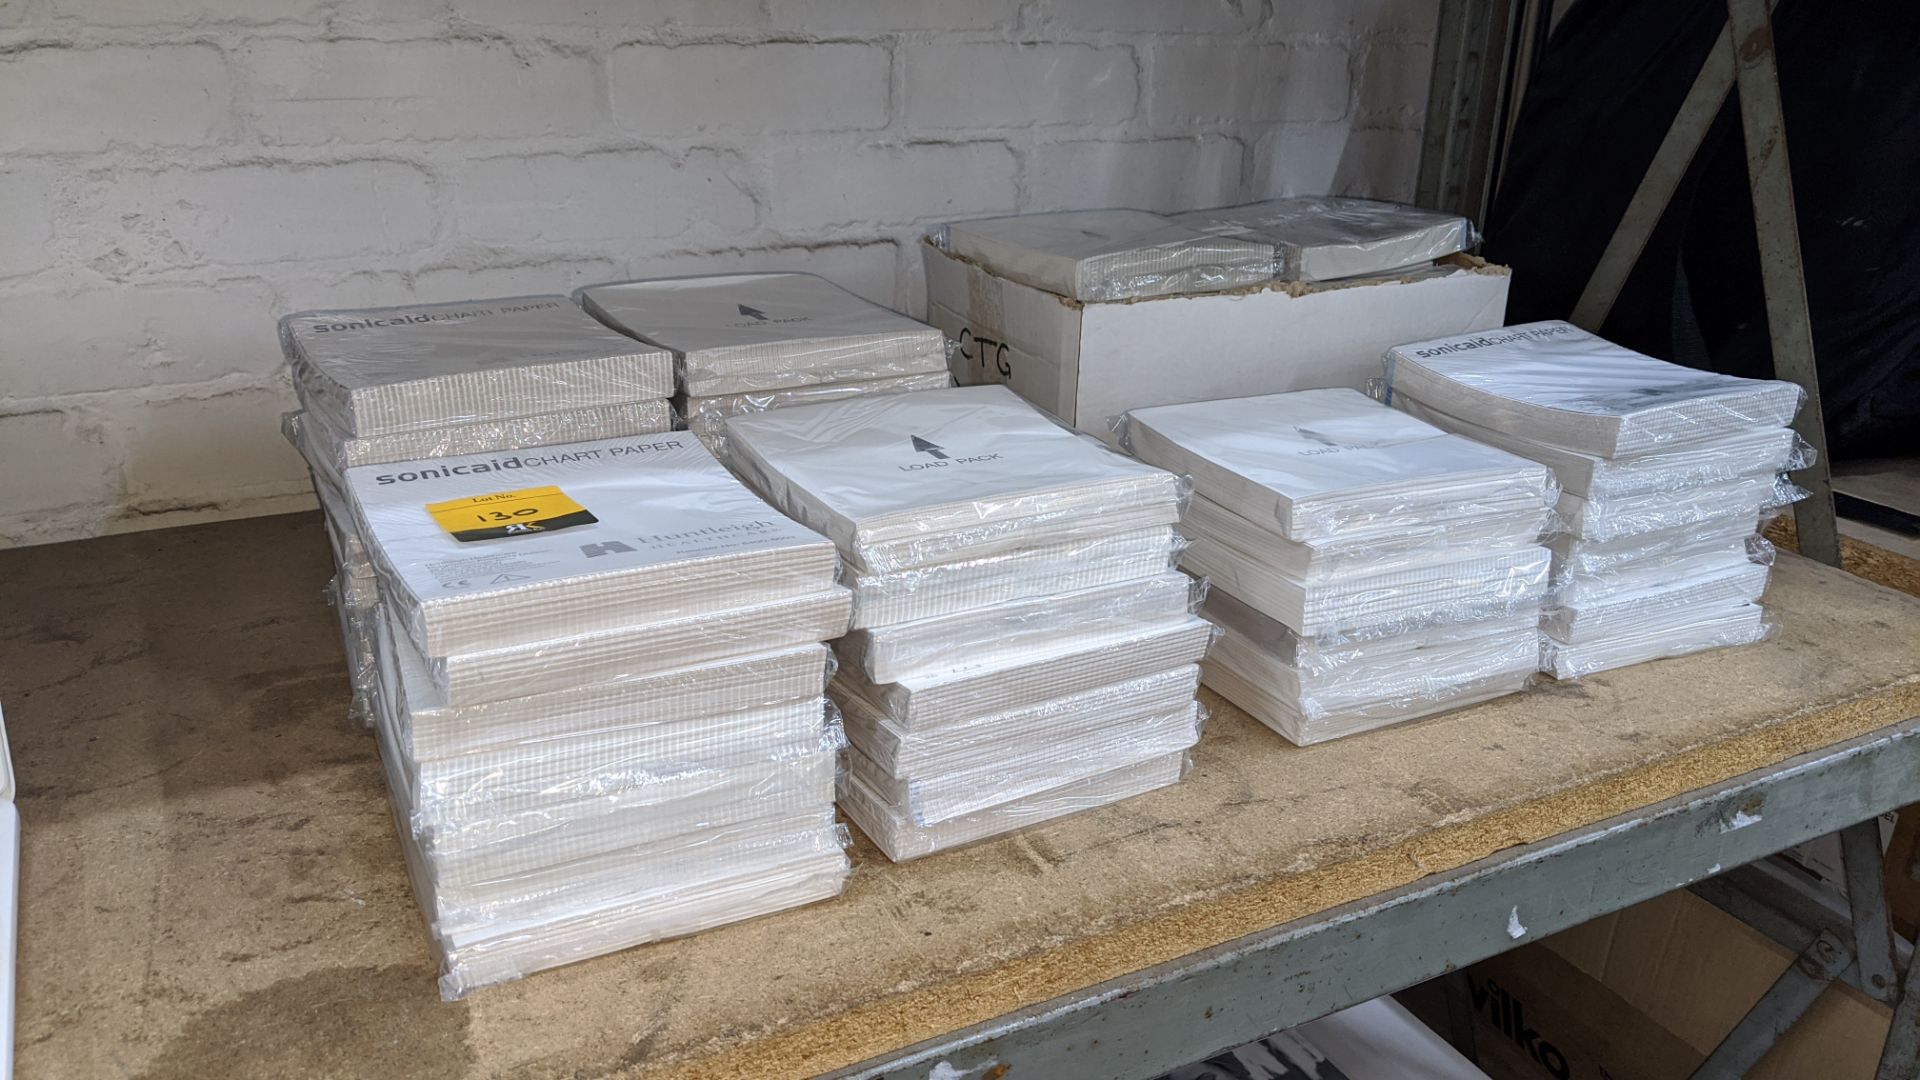 Quantity of Sonicaid medical monitoring chart paper. This is one of a small number of lots that